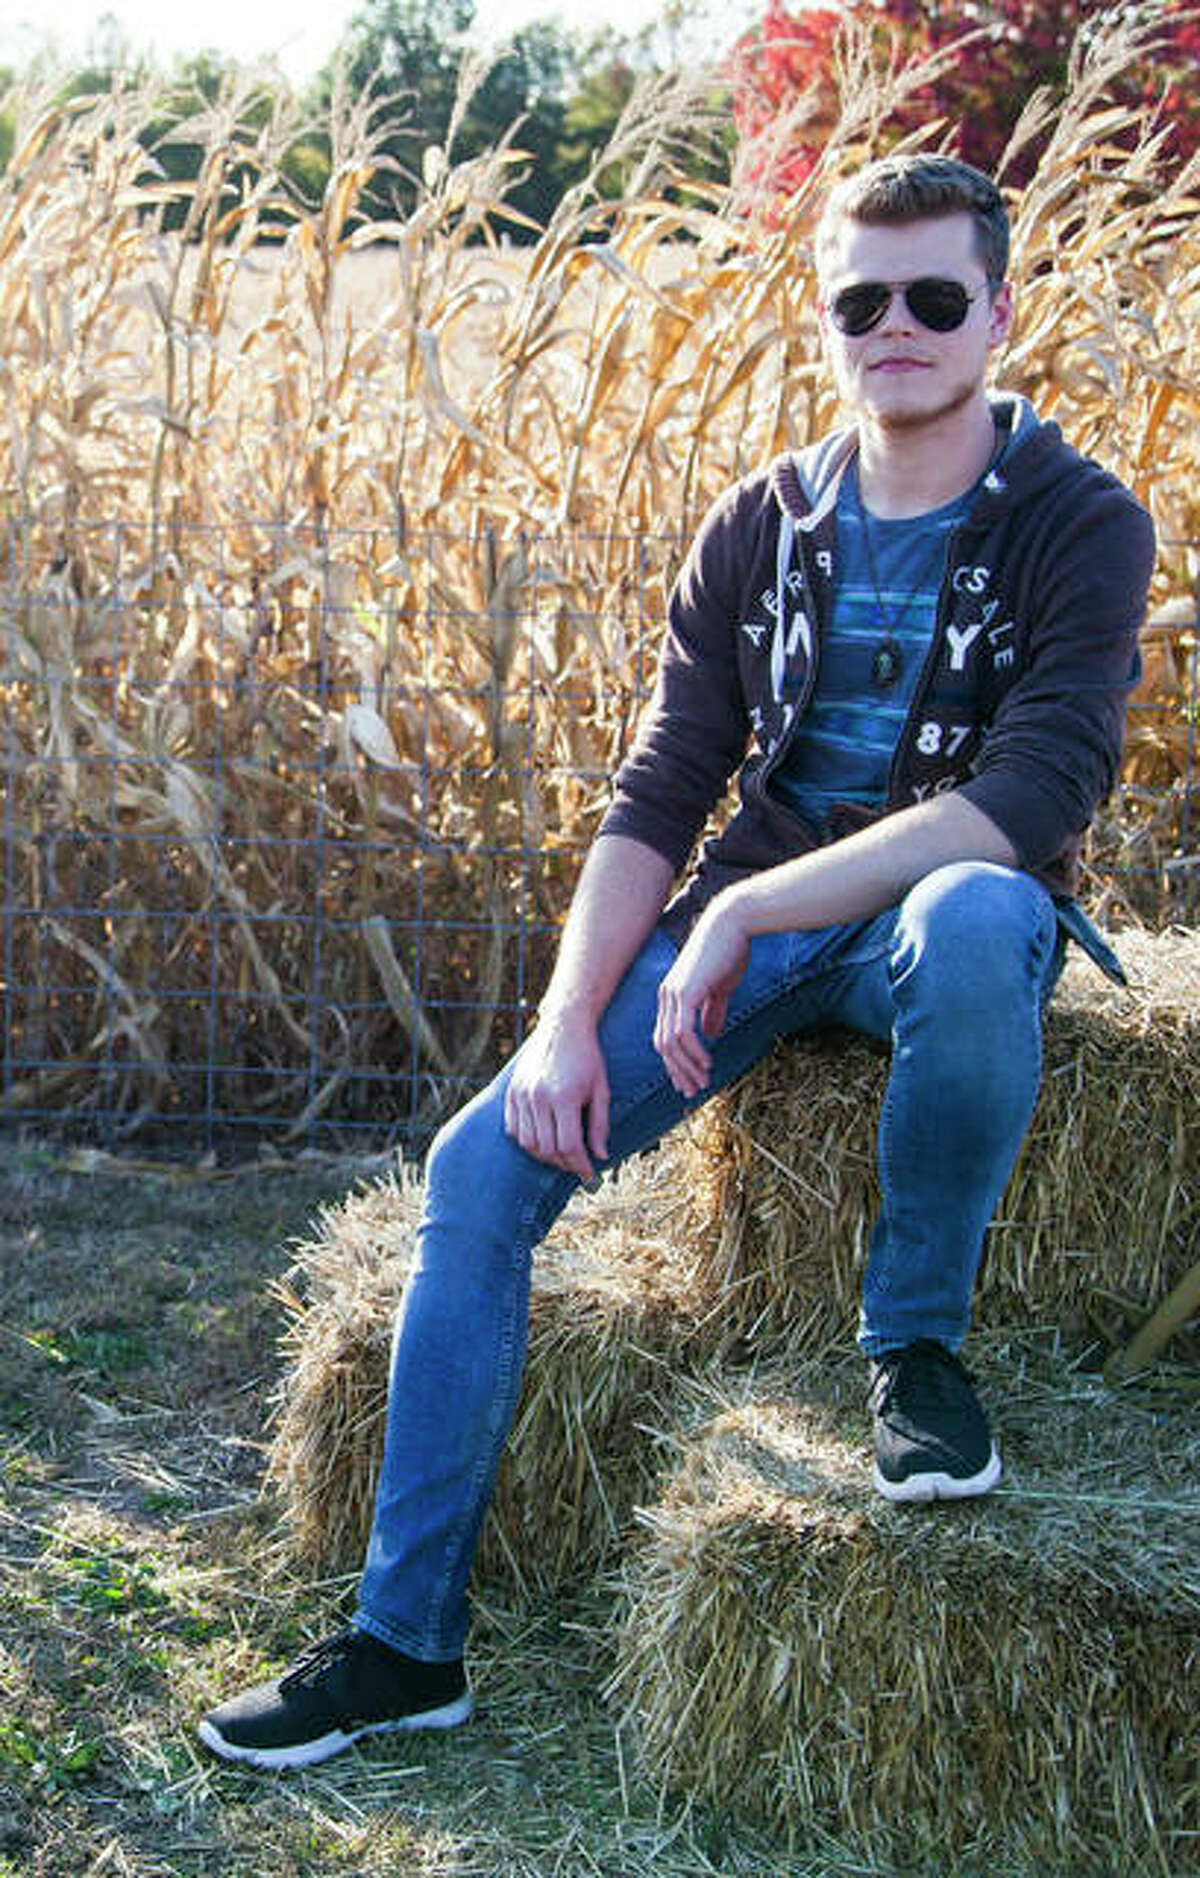 Jordan Bruce, is a Halloween enthusiast and a volunteer at the Haunted Great Godfrey Corn Maze in Glazebrook Park, 1401 Stamper Lane, Godfrey.